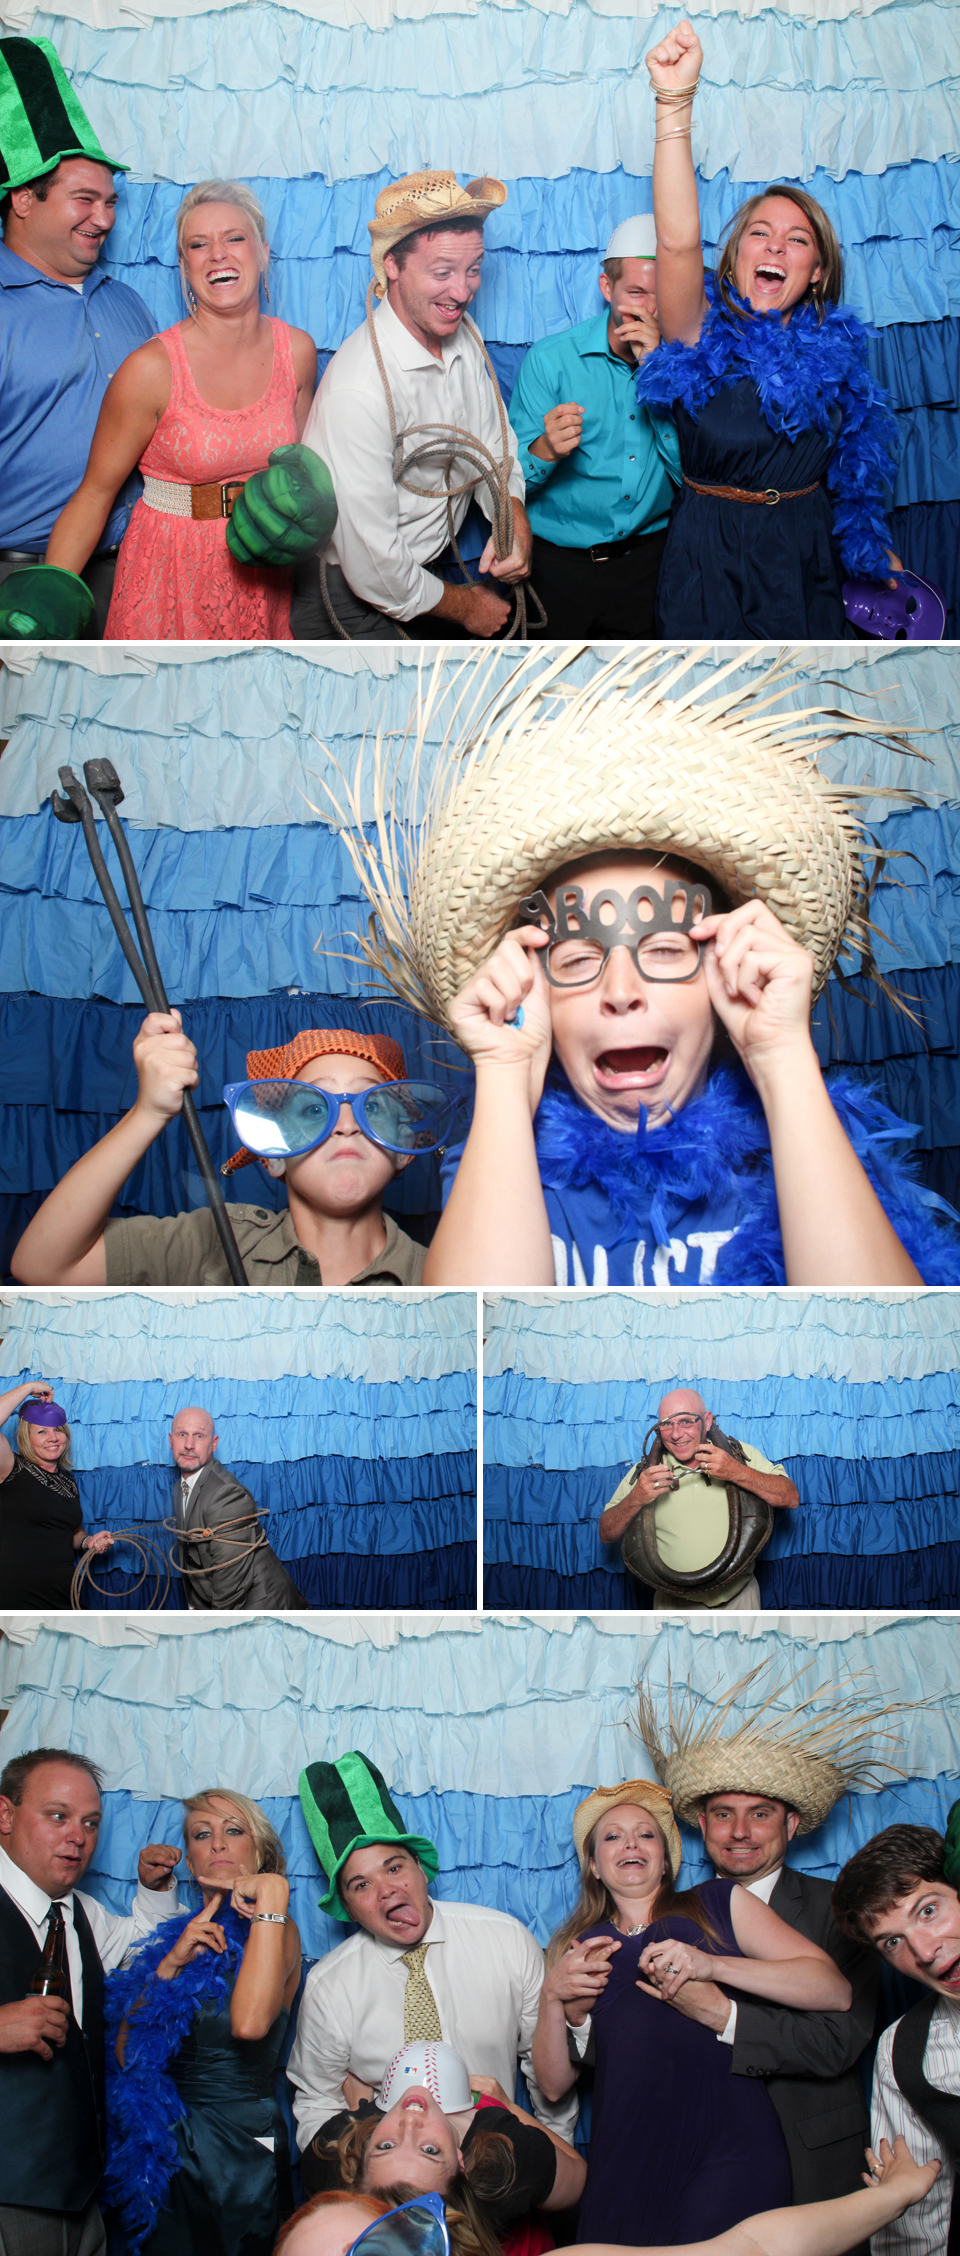 Best Kansas City photobooths, midwest weddings, Bride and Groom, DIY backdrops, silly kids